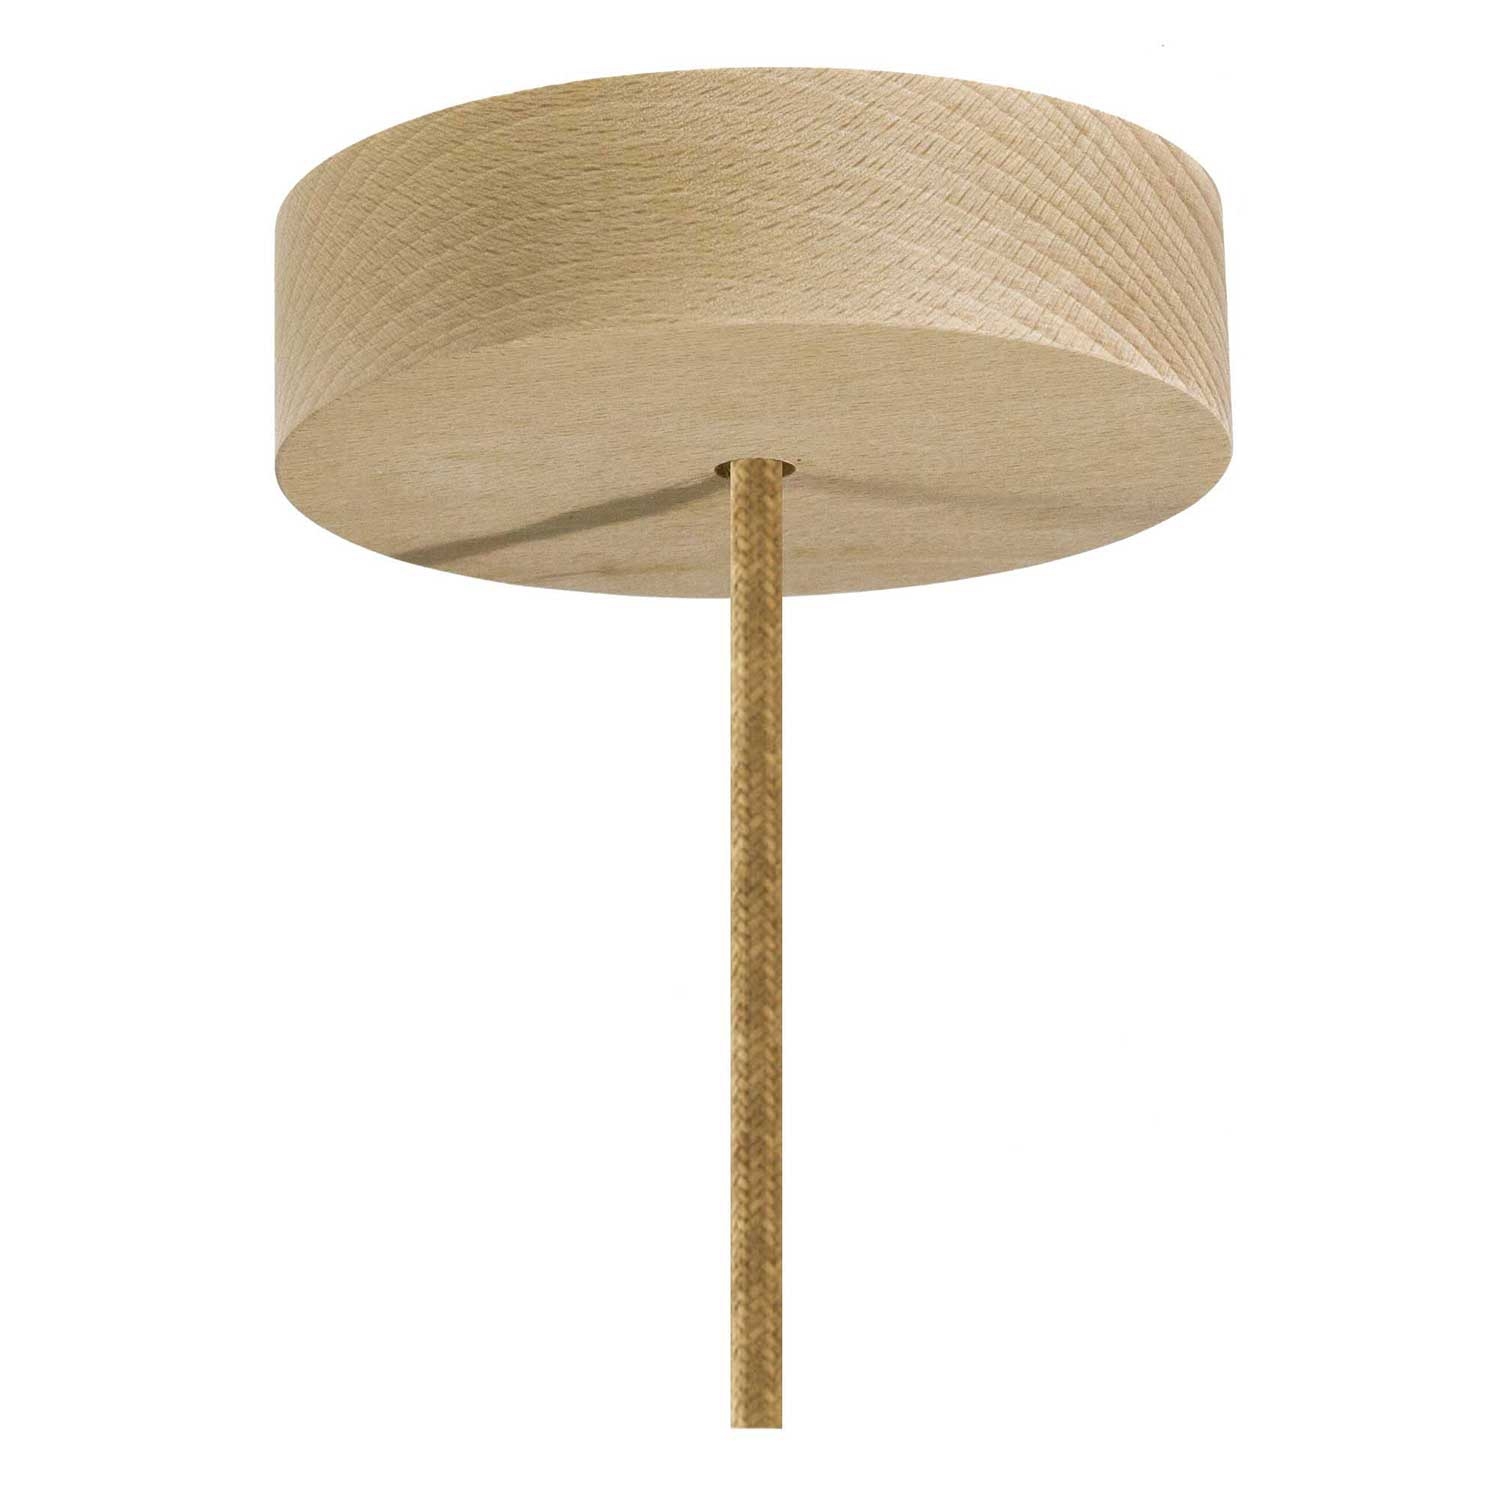 Pendant lamp with textile cable, raffia Cylinder lampshade and metal details